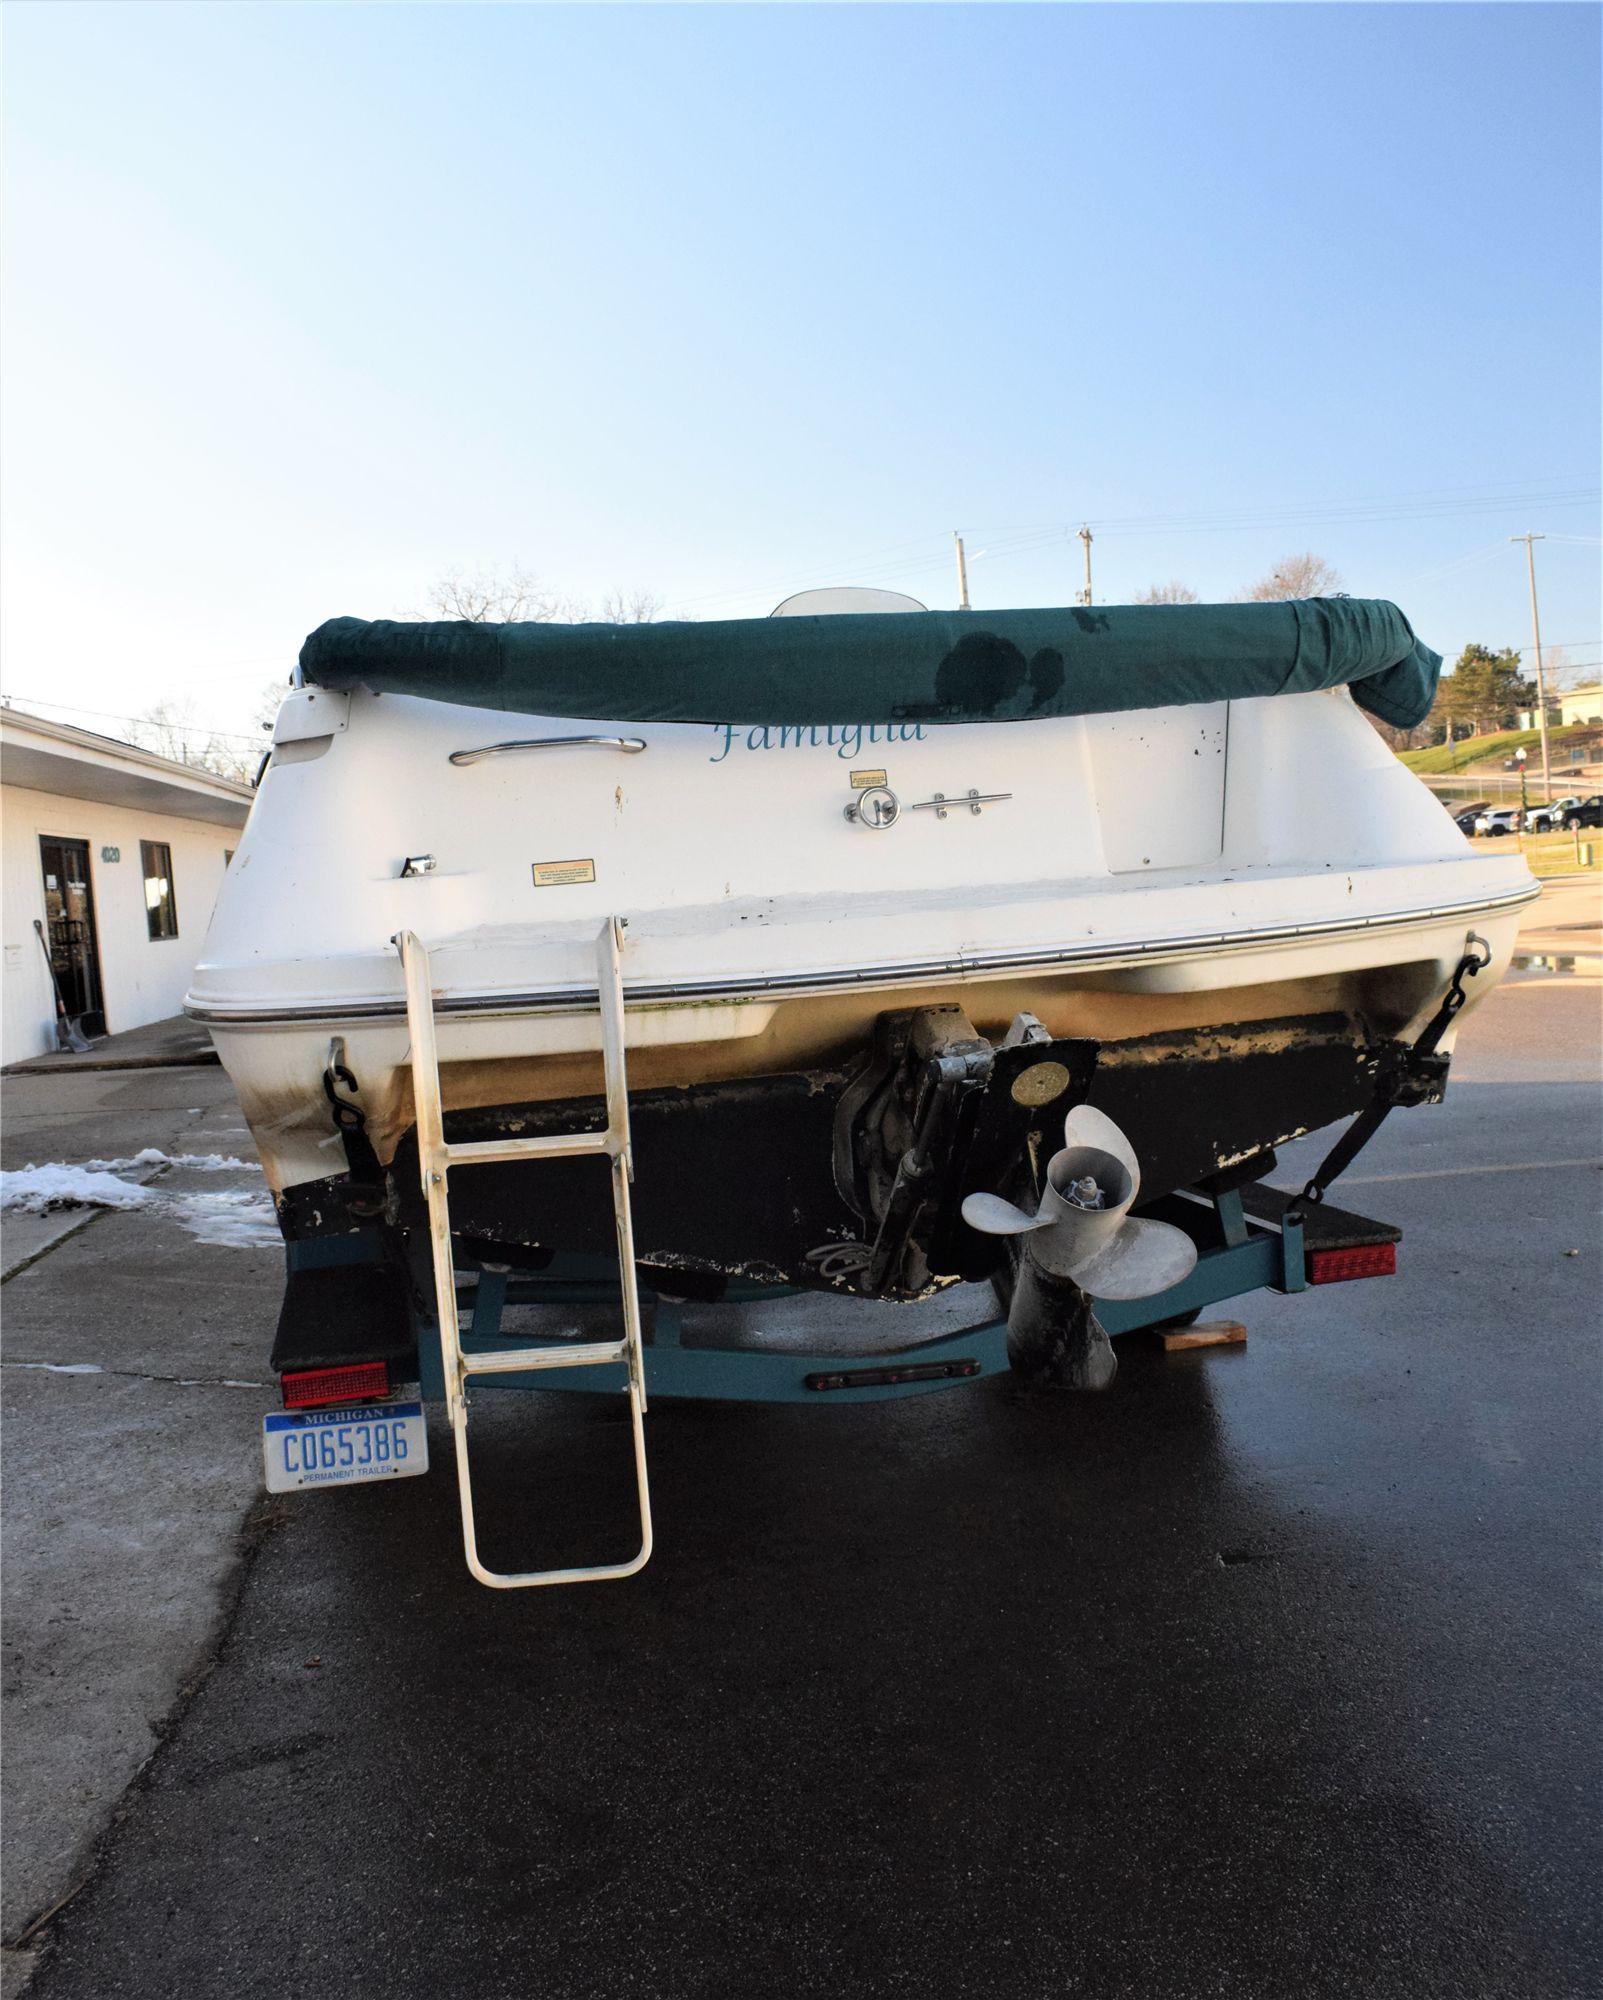 1998 Sea Ray Model: Sundeck 240. VIN:SERV6106E898. Hours: 550. This boat is located in Grand Rapids,